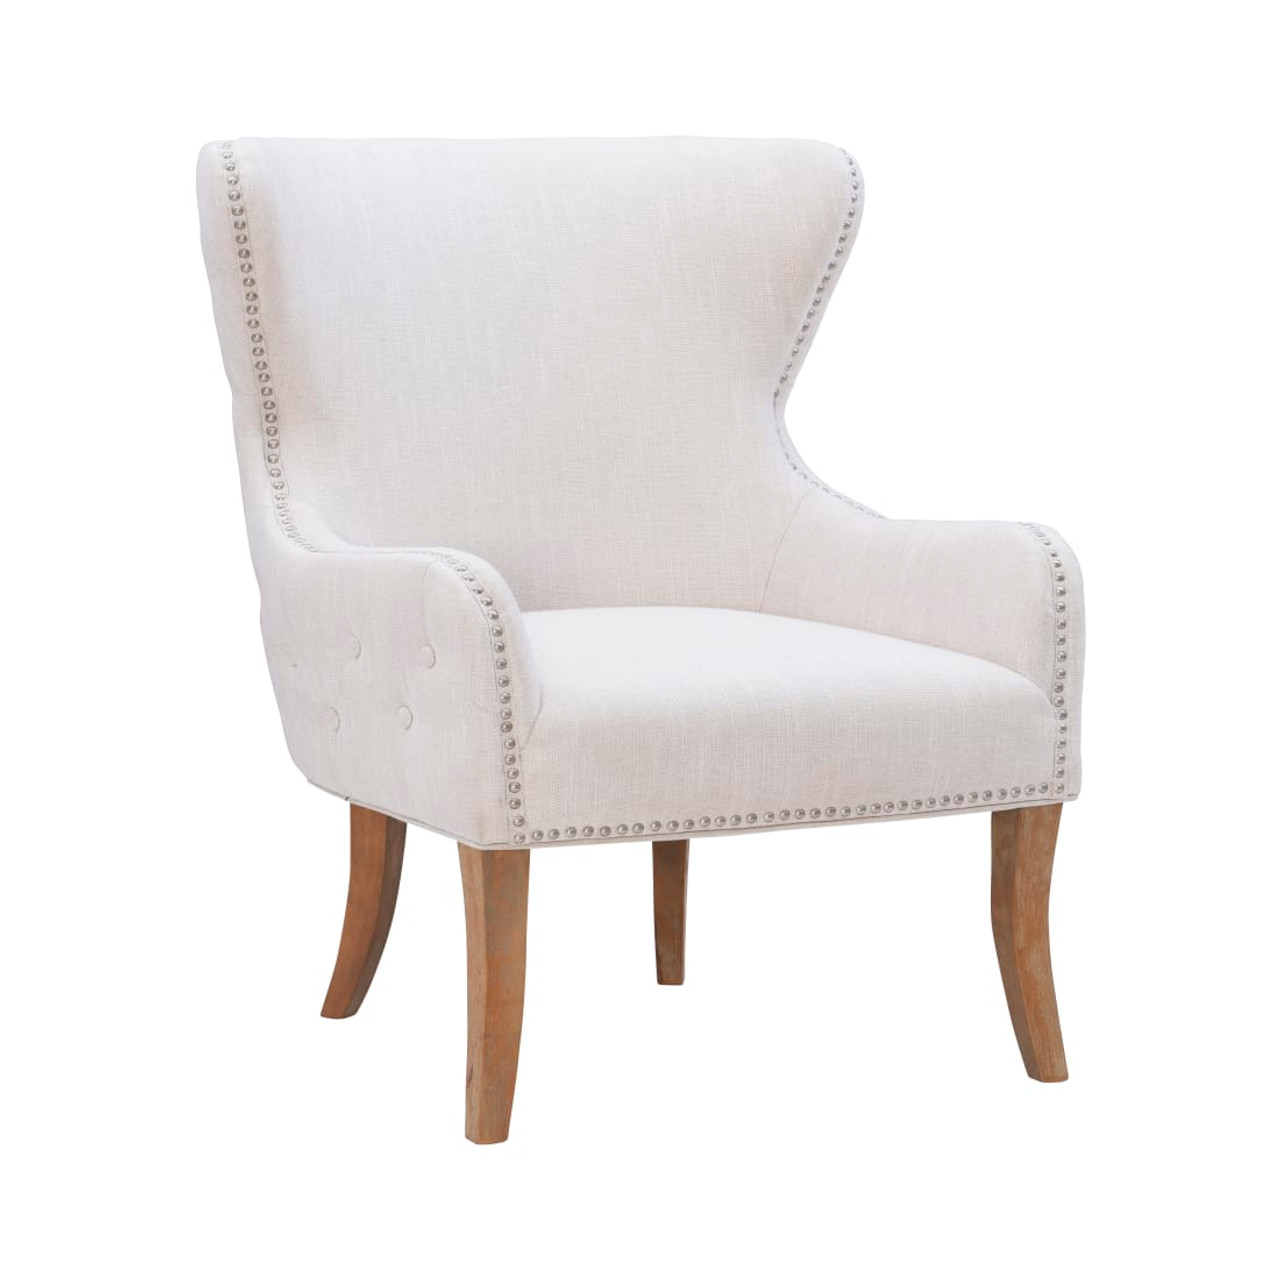 Ponselle Round Back Chair Natural